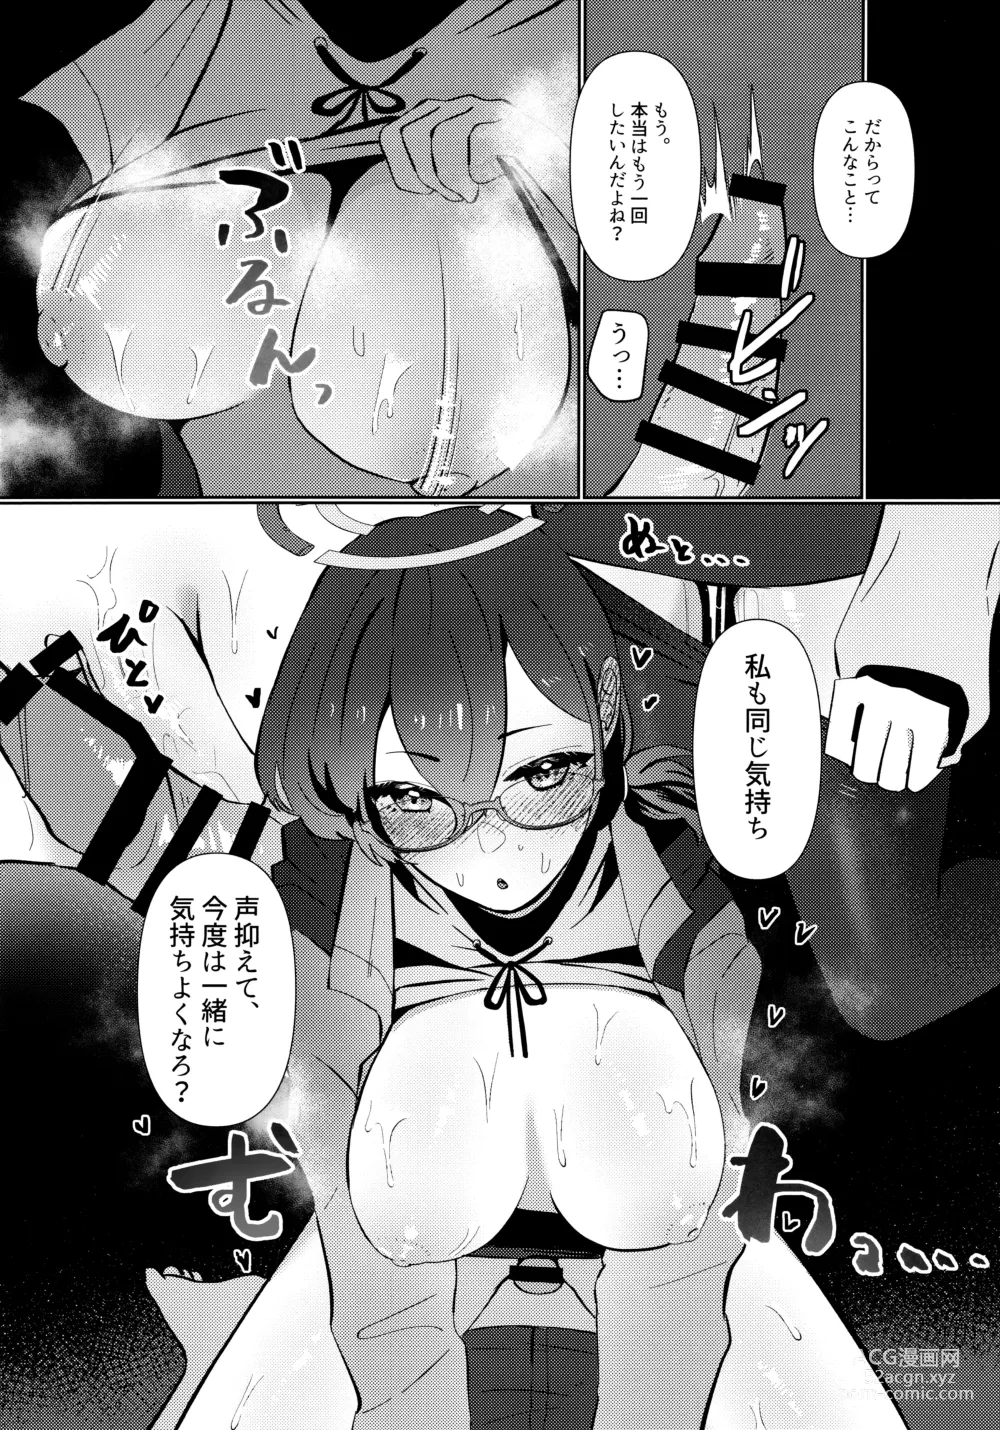 Page 11 of doujinshi Mayonaka Hacking - hacking in the middle of the night